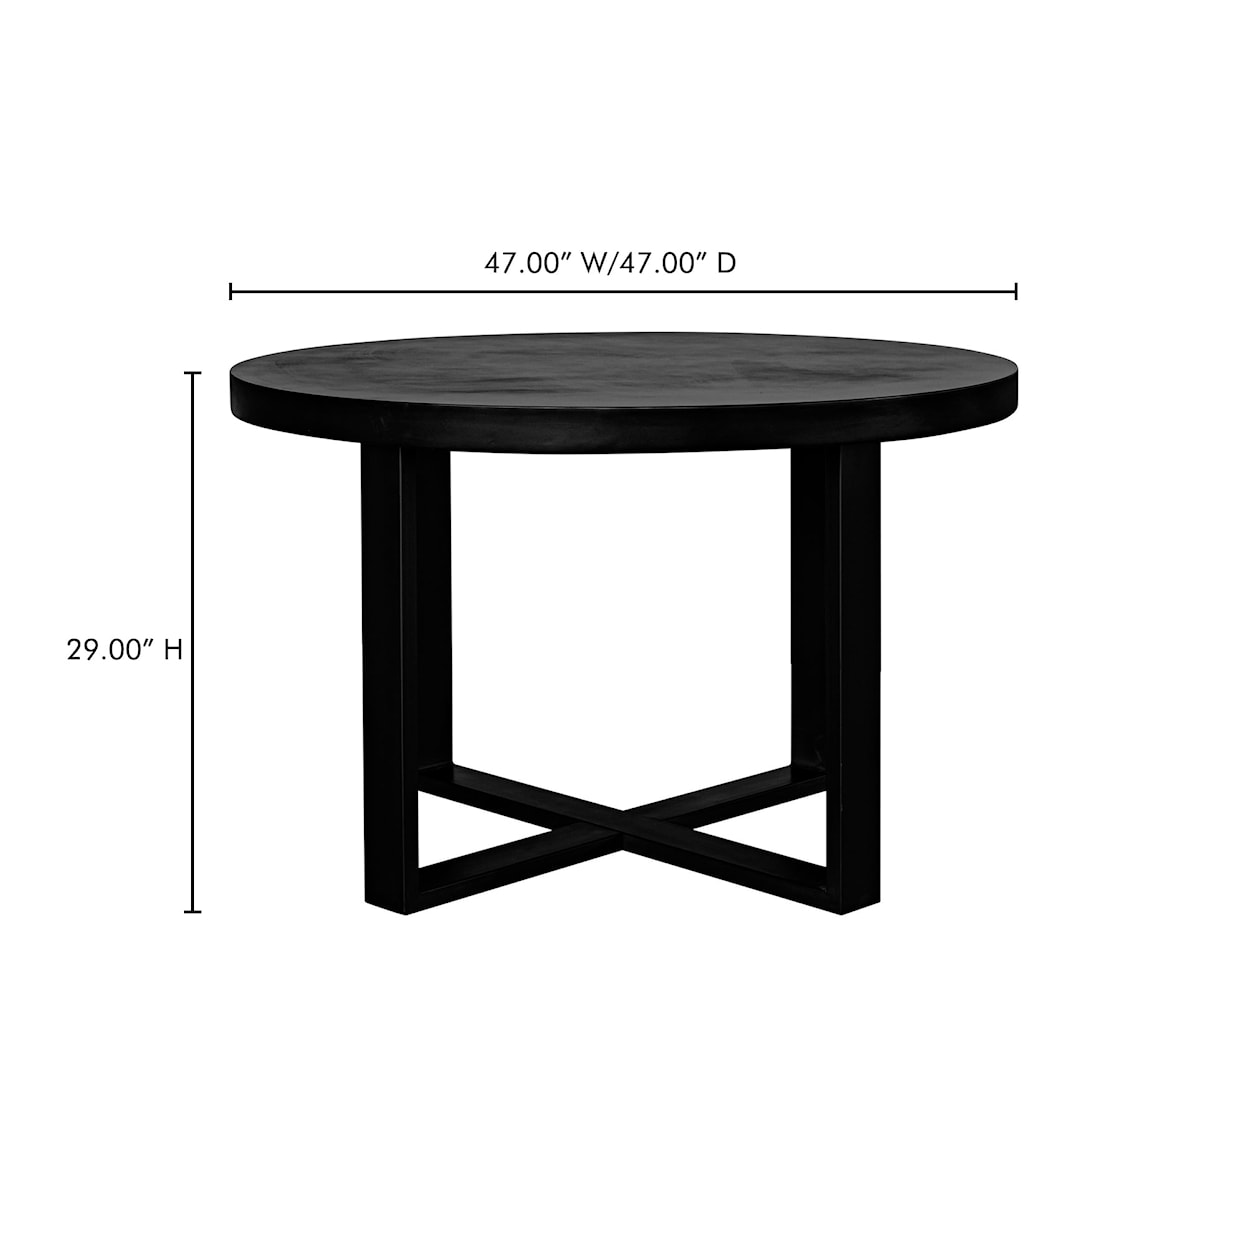 Moe's Home Collection Jedrik Outdoor Dining Table